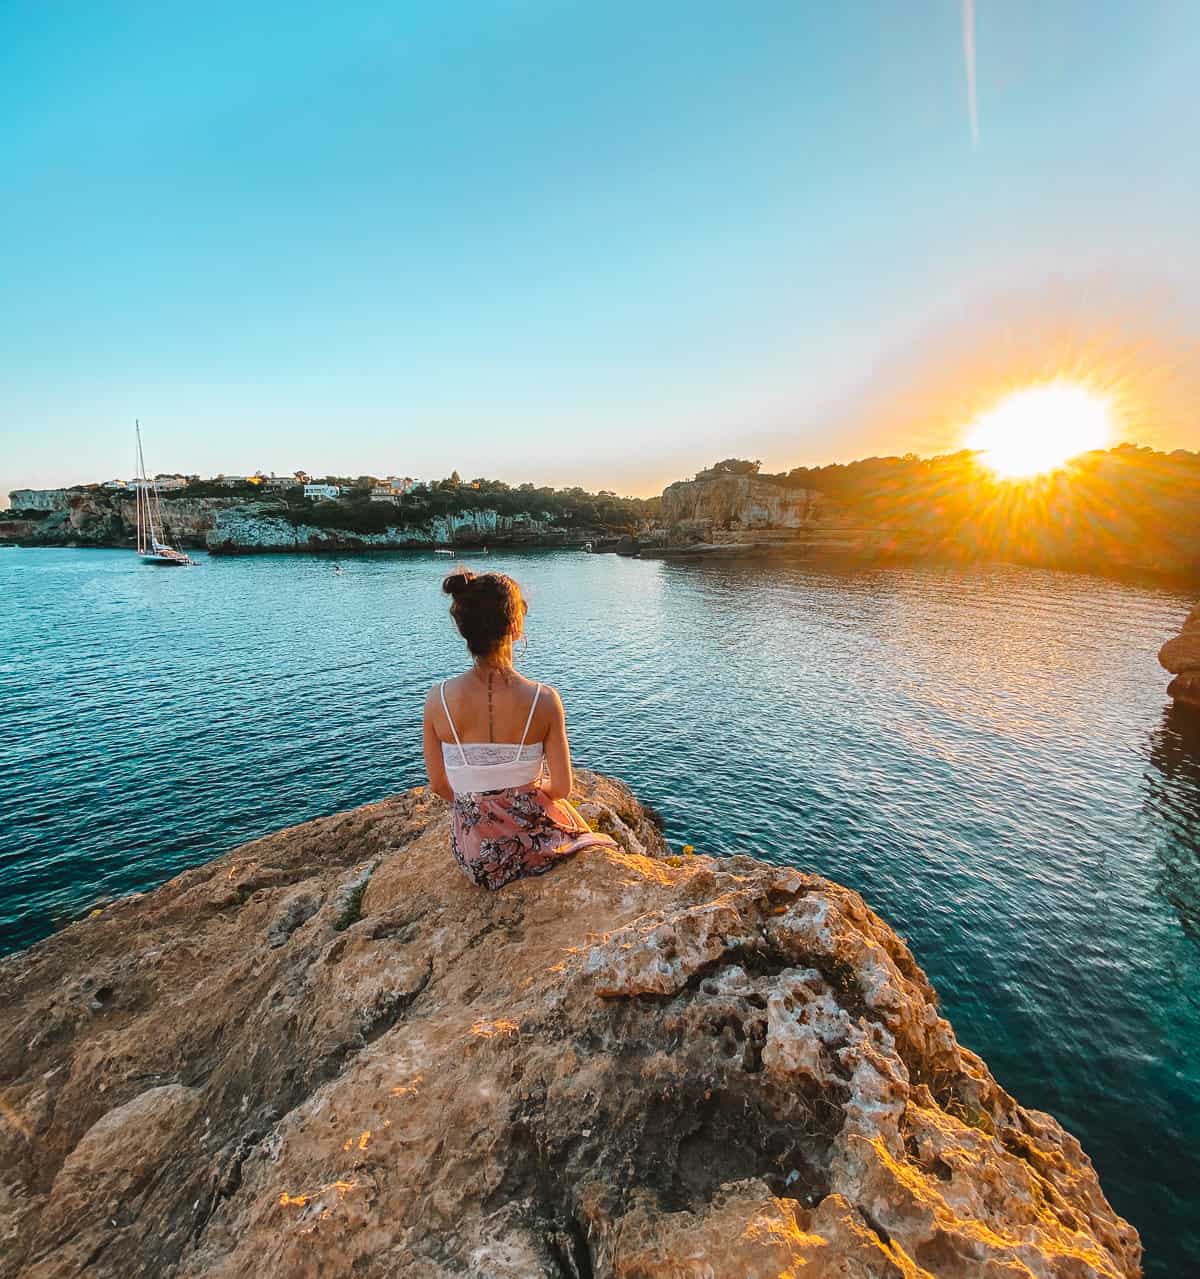 A woman sitting on a rock formation looking over the sunset on the ocean